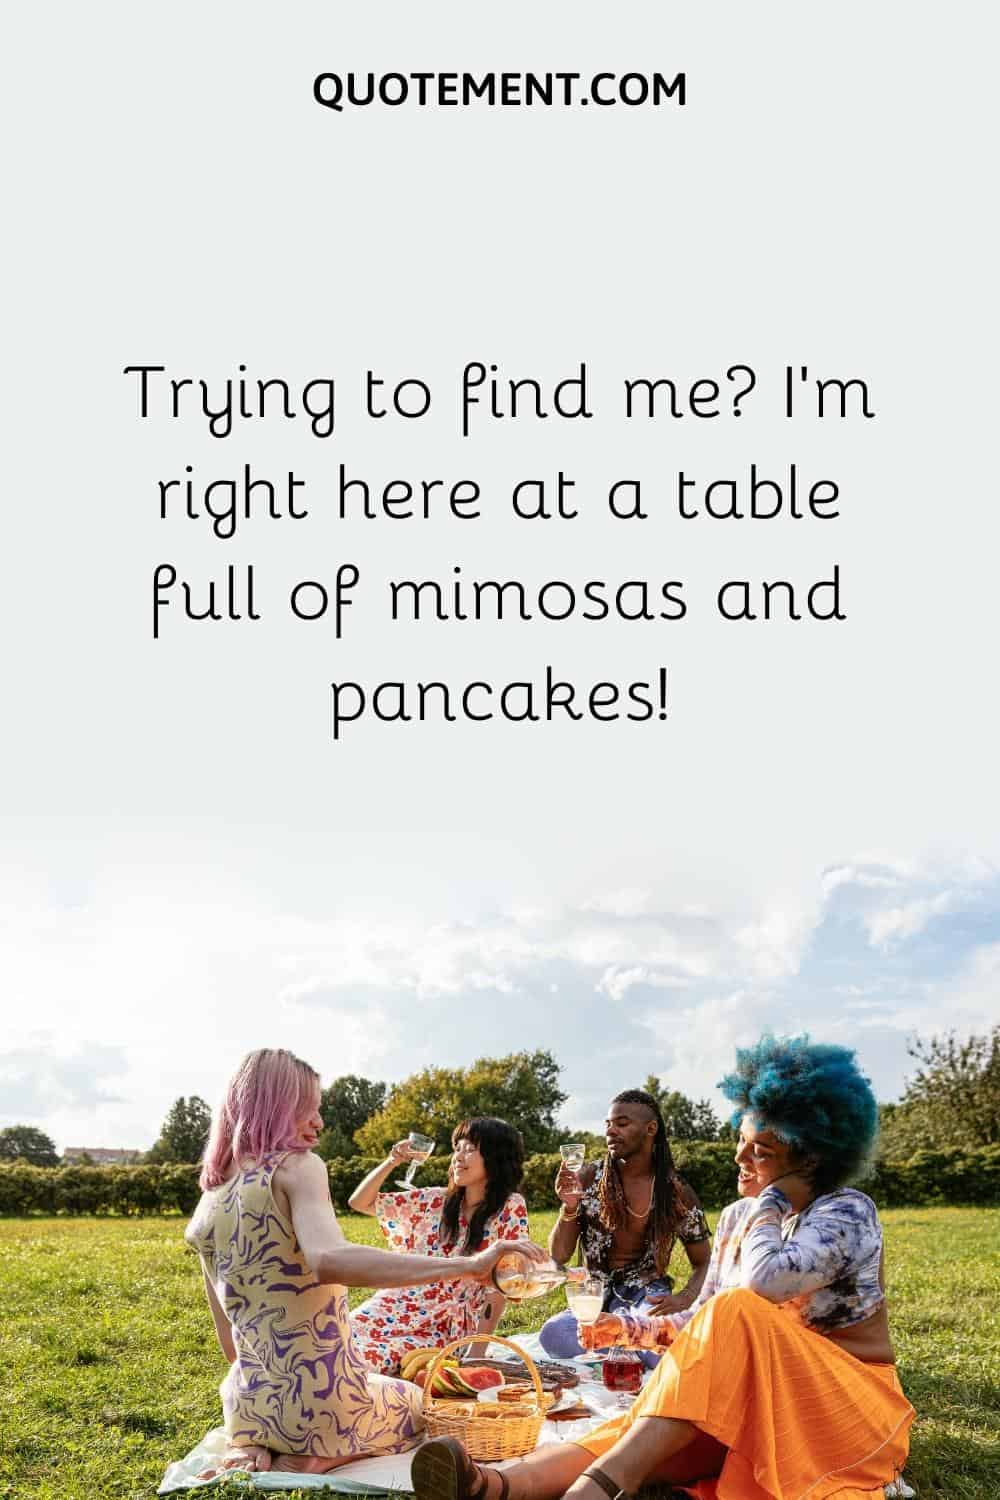 Trying to find me I'm right here at a table full of mimosas and pancakes!